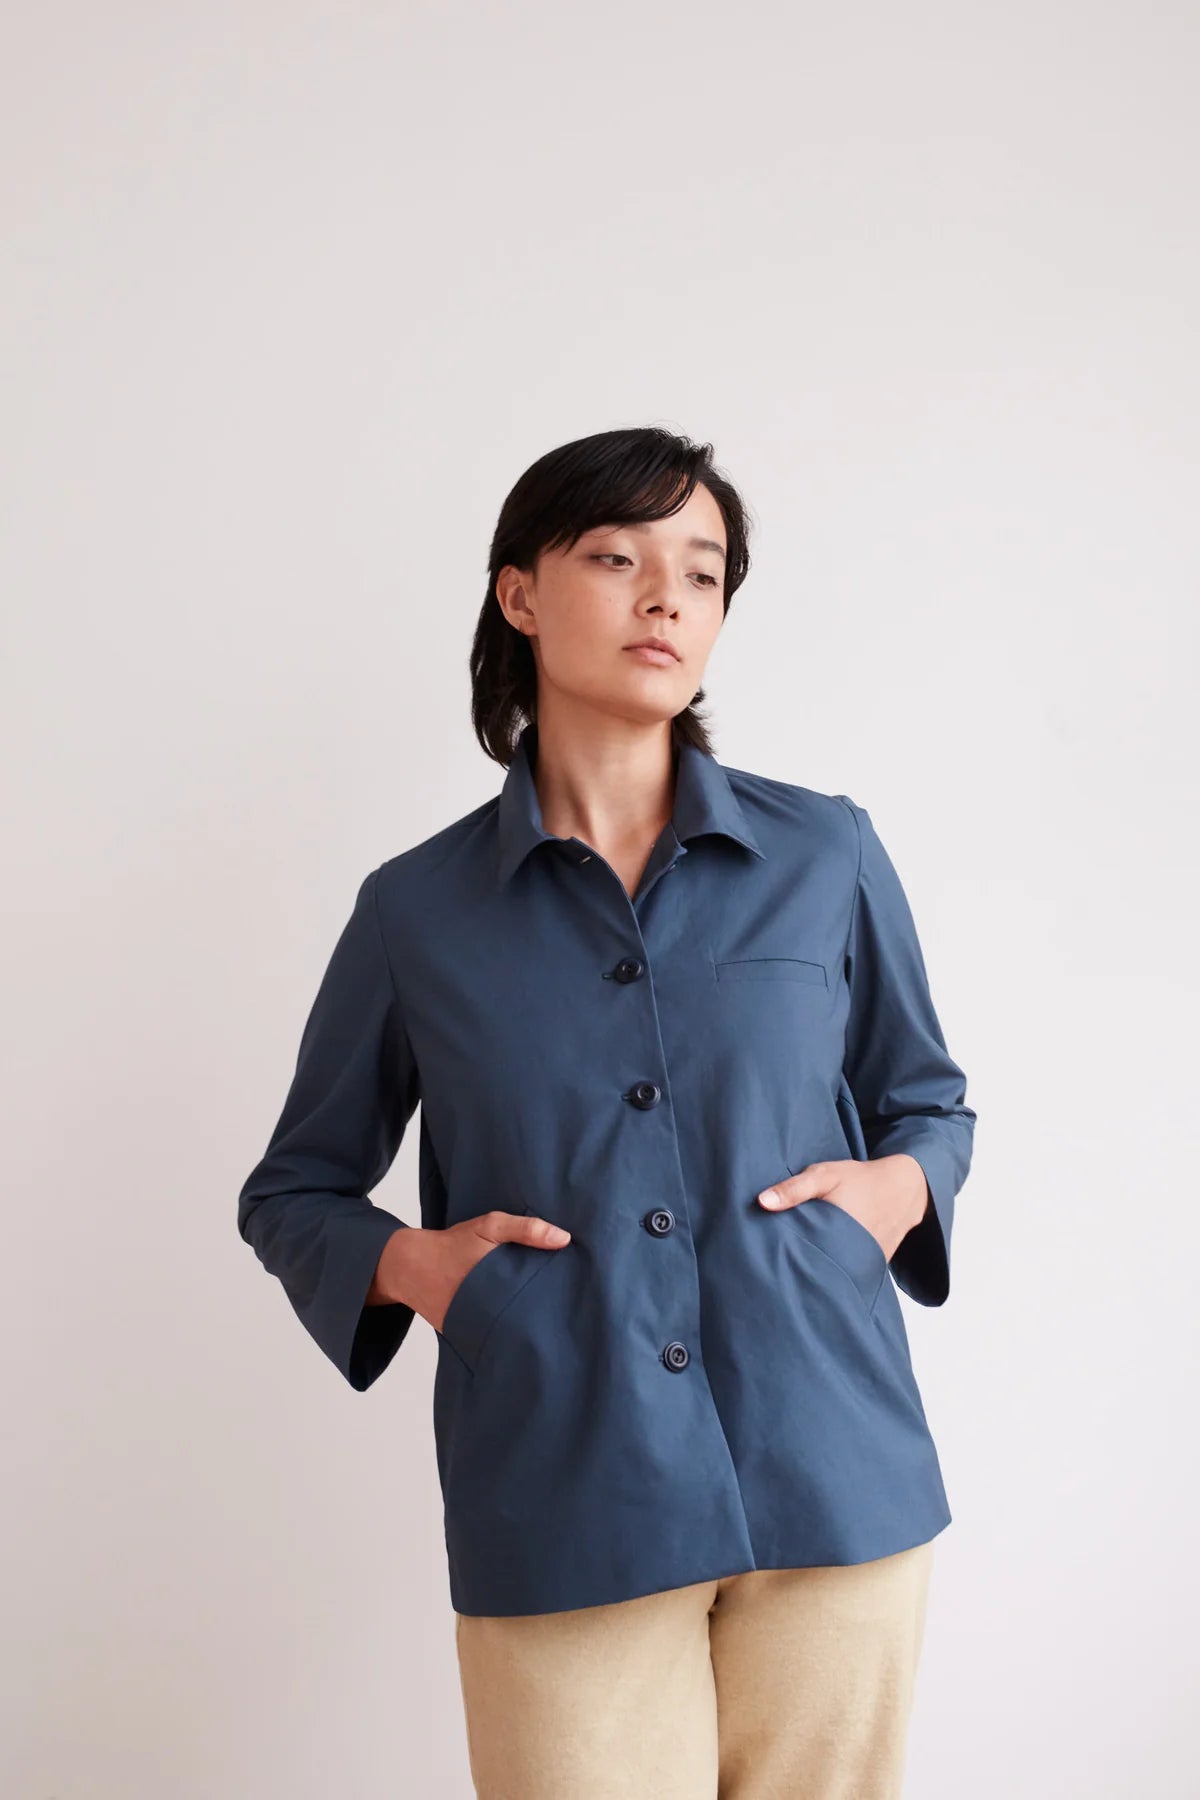 The Modern Sewing Co. Potters Jacket